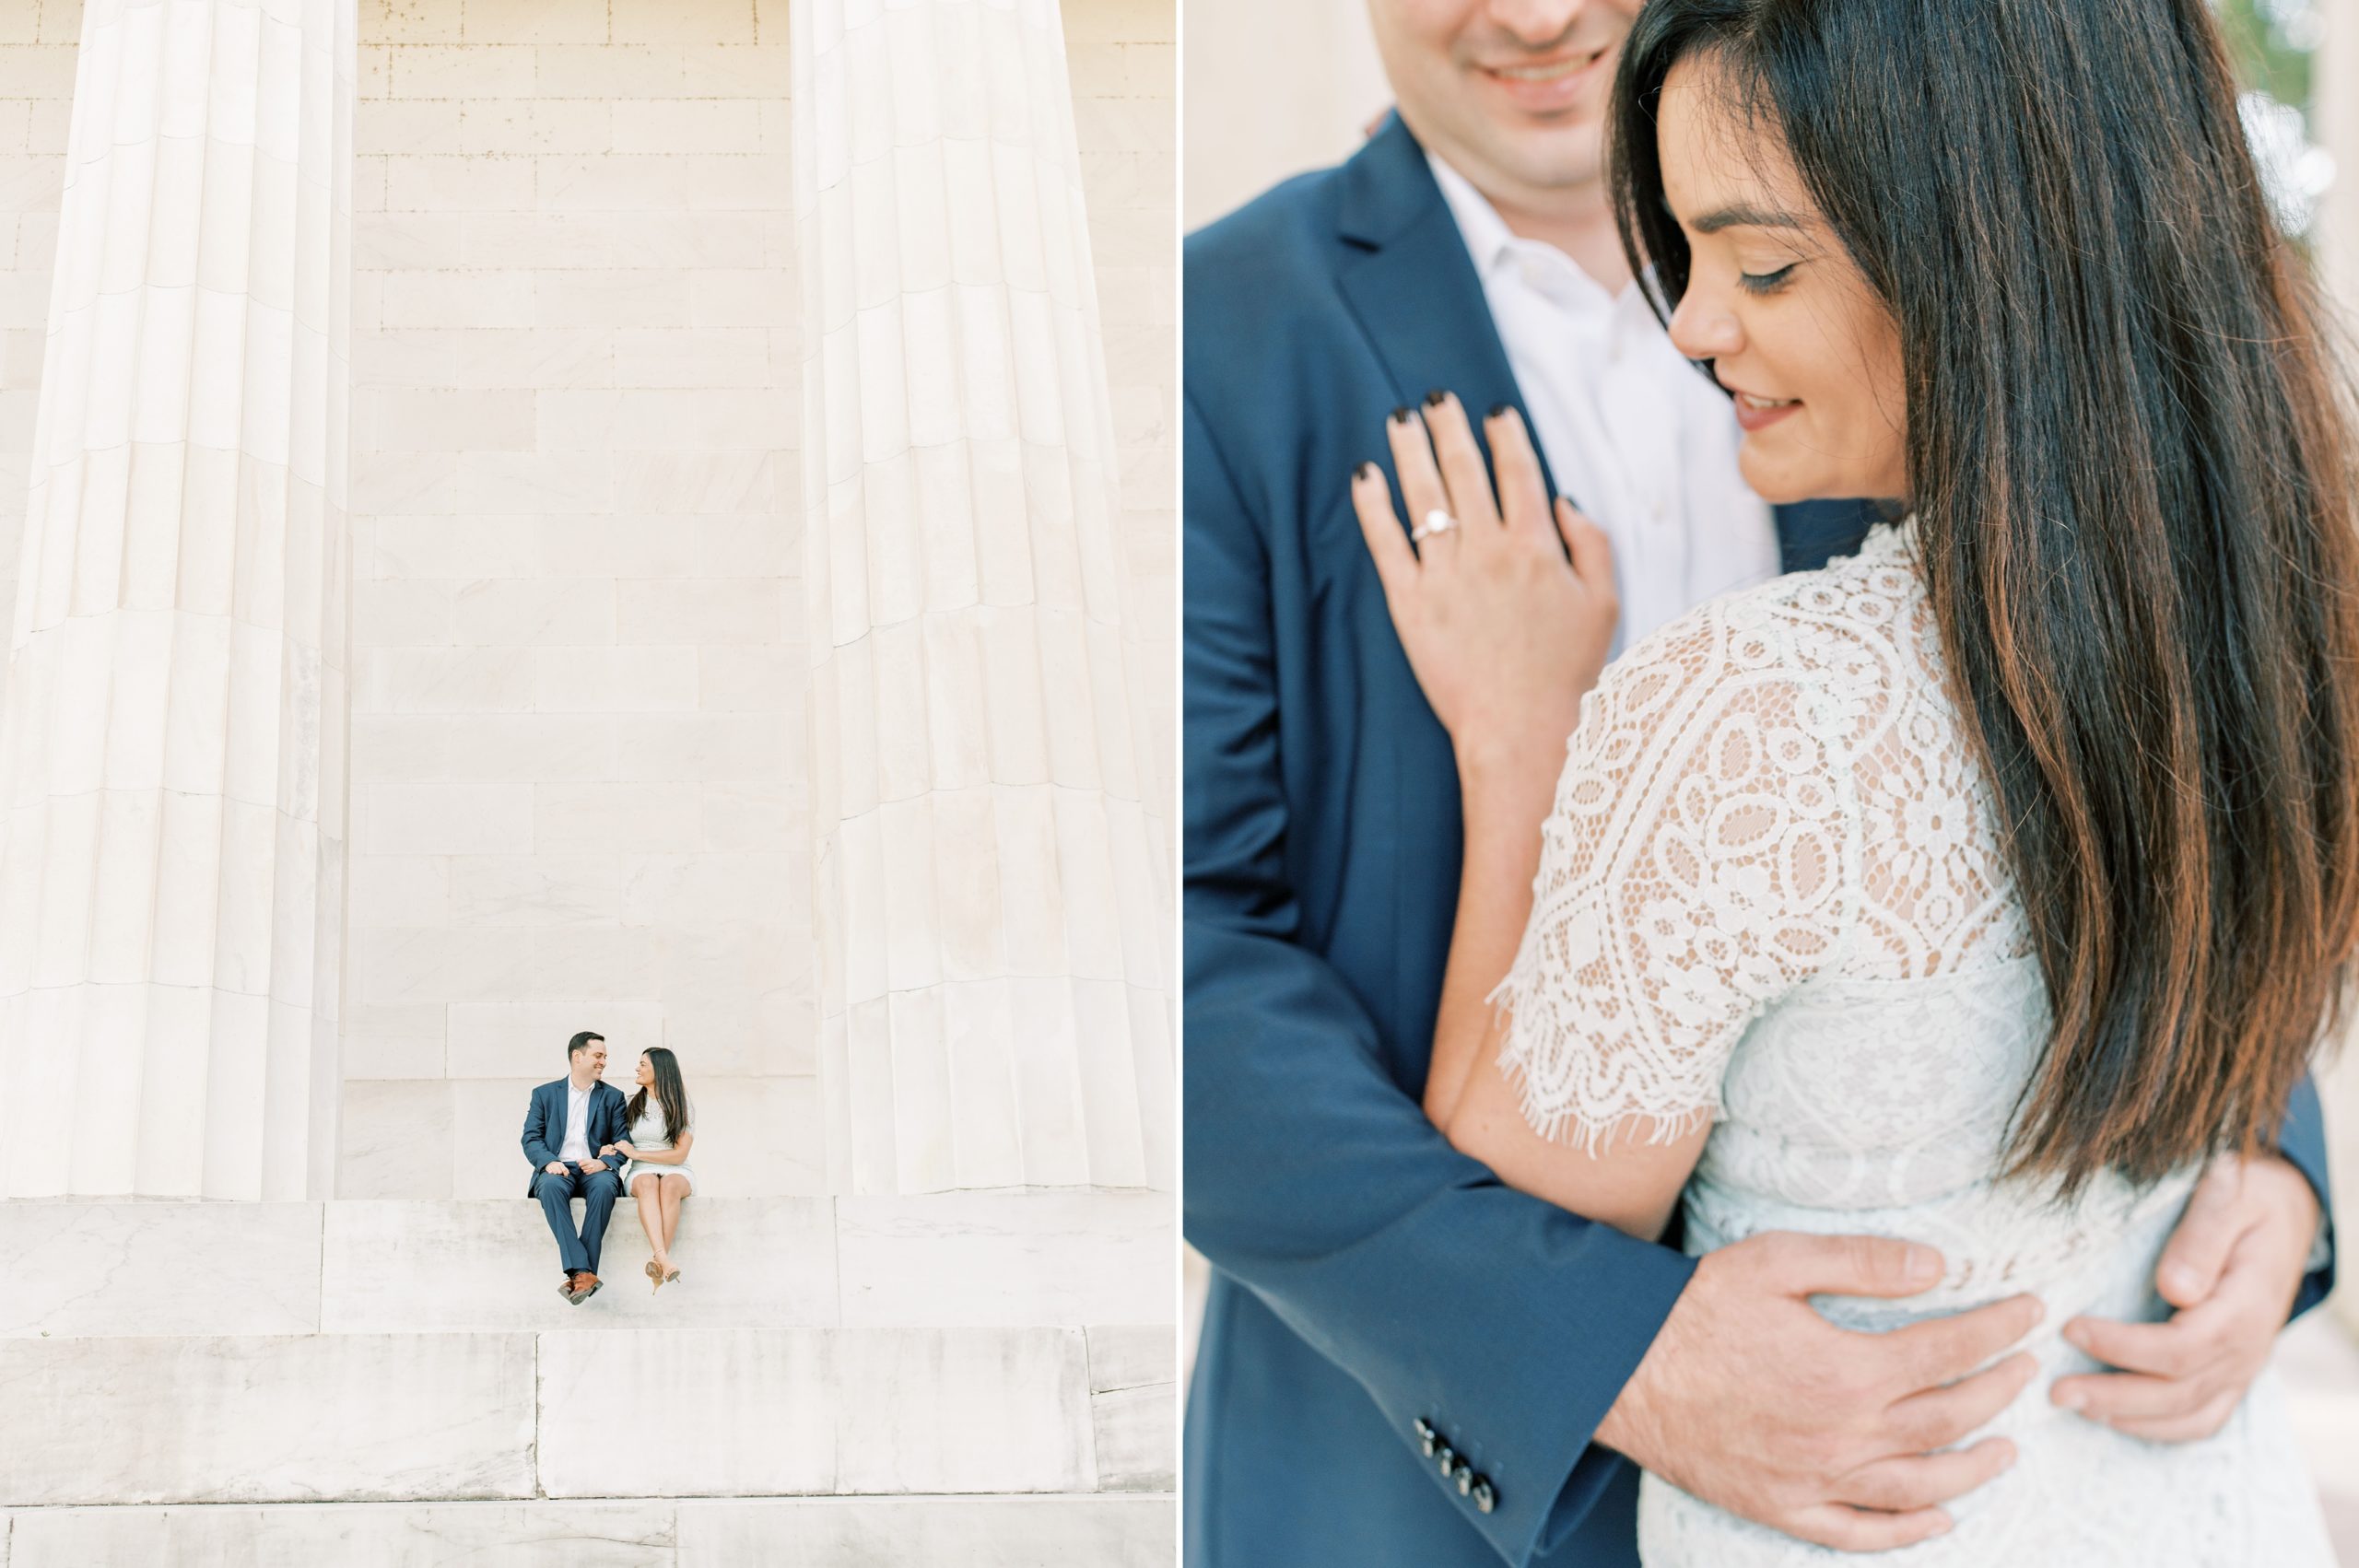 This Washington, DC wedding photographer reviews the highlights of her engagement portrait sessions from the 2020 season.